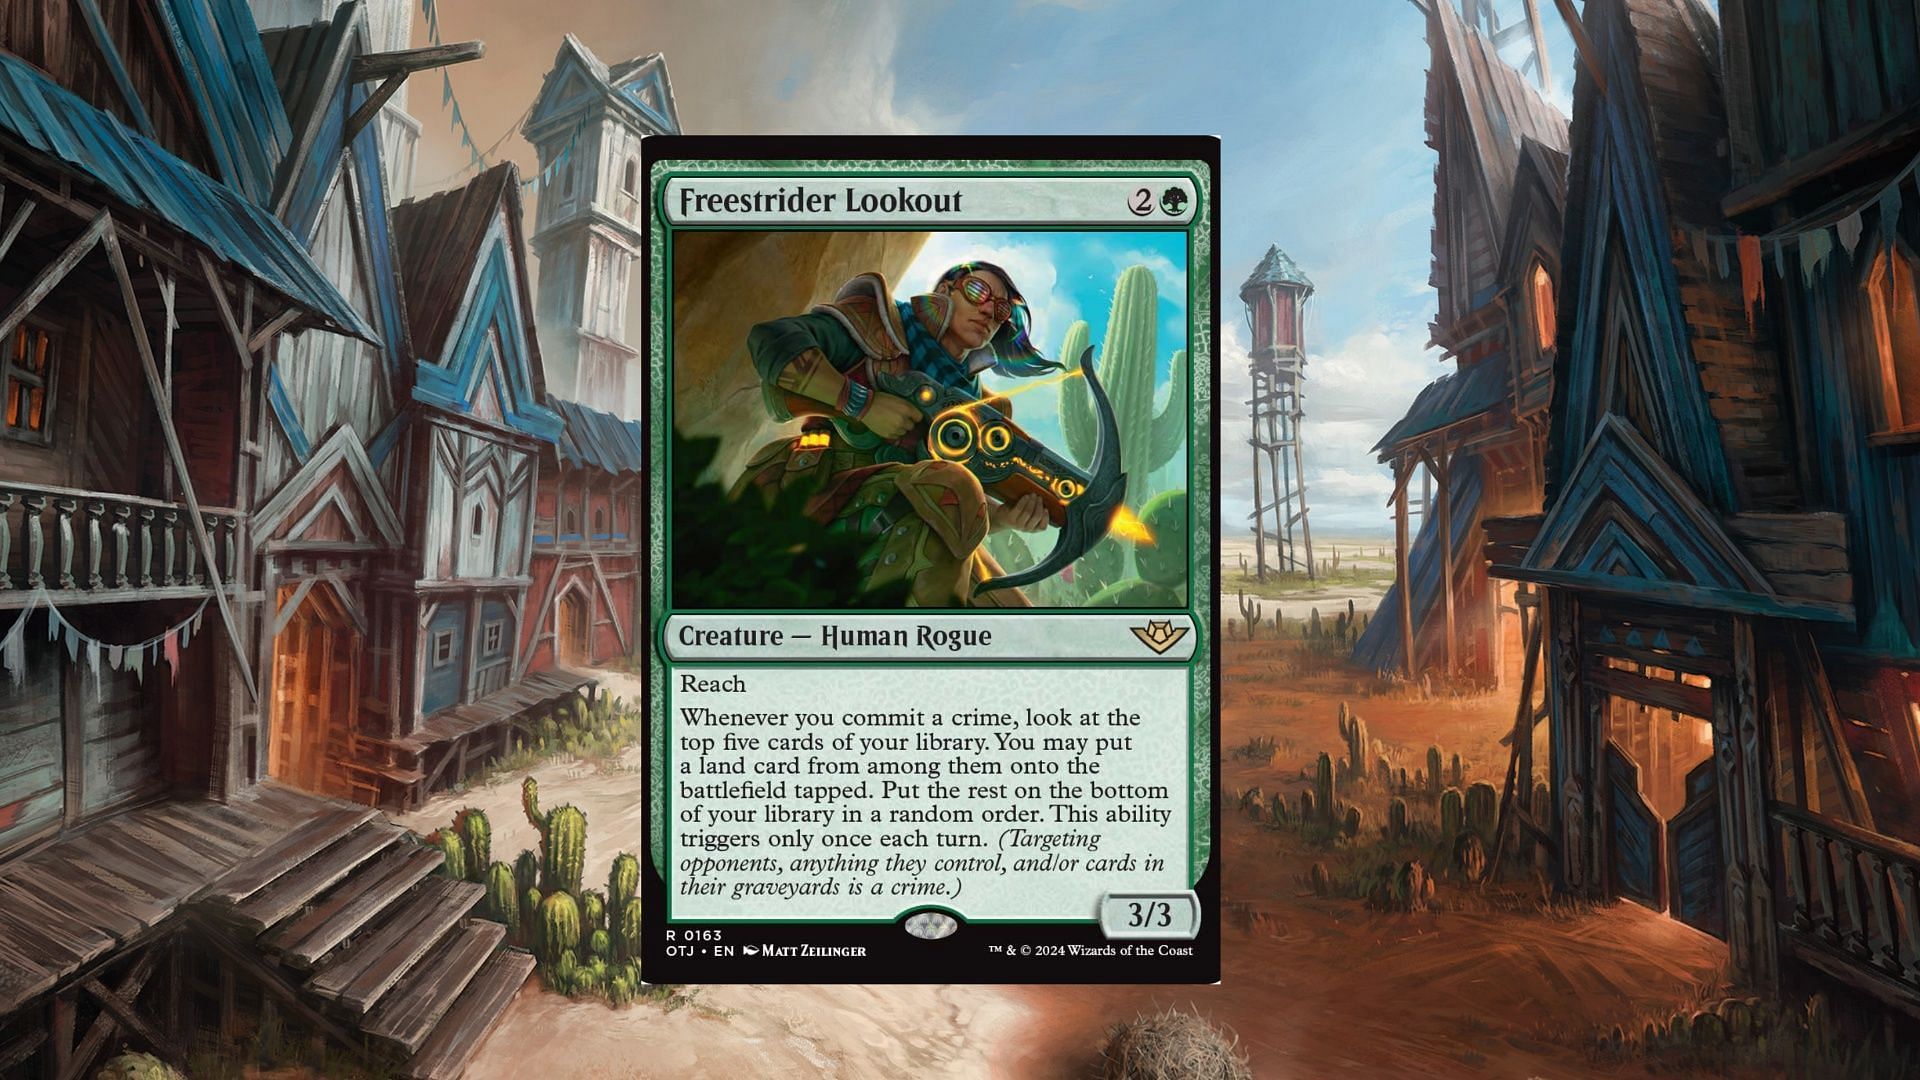 Freestrider Lookout in Magic: The Gathering (Image via Wizards of the Coast)